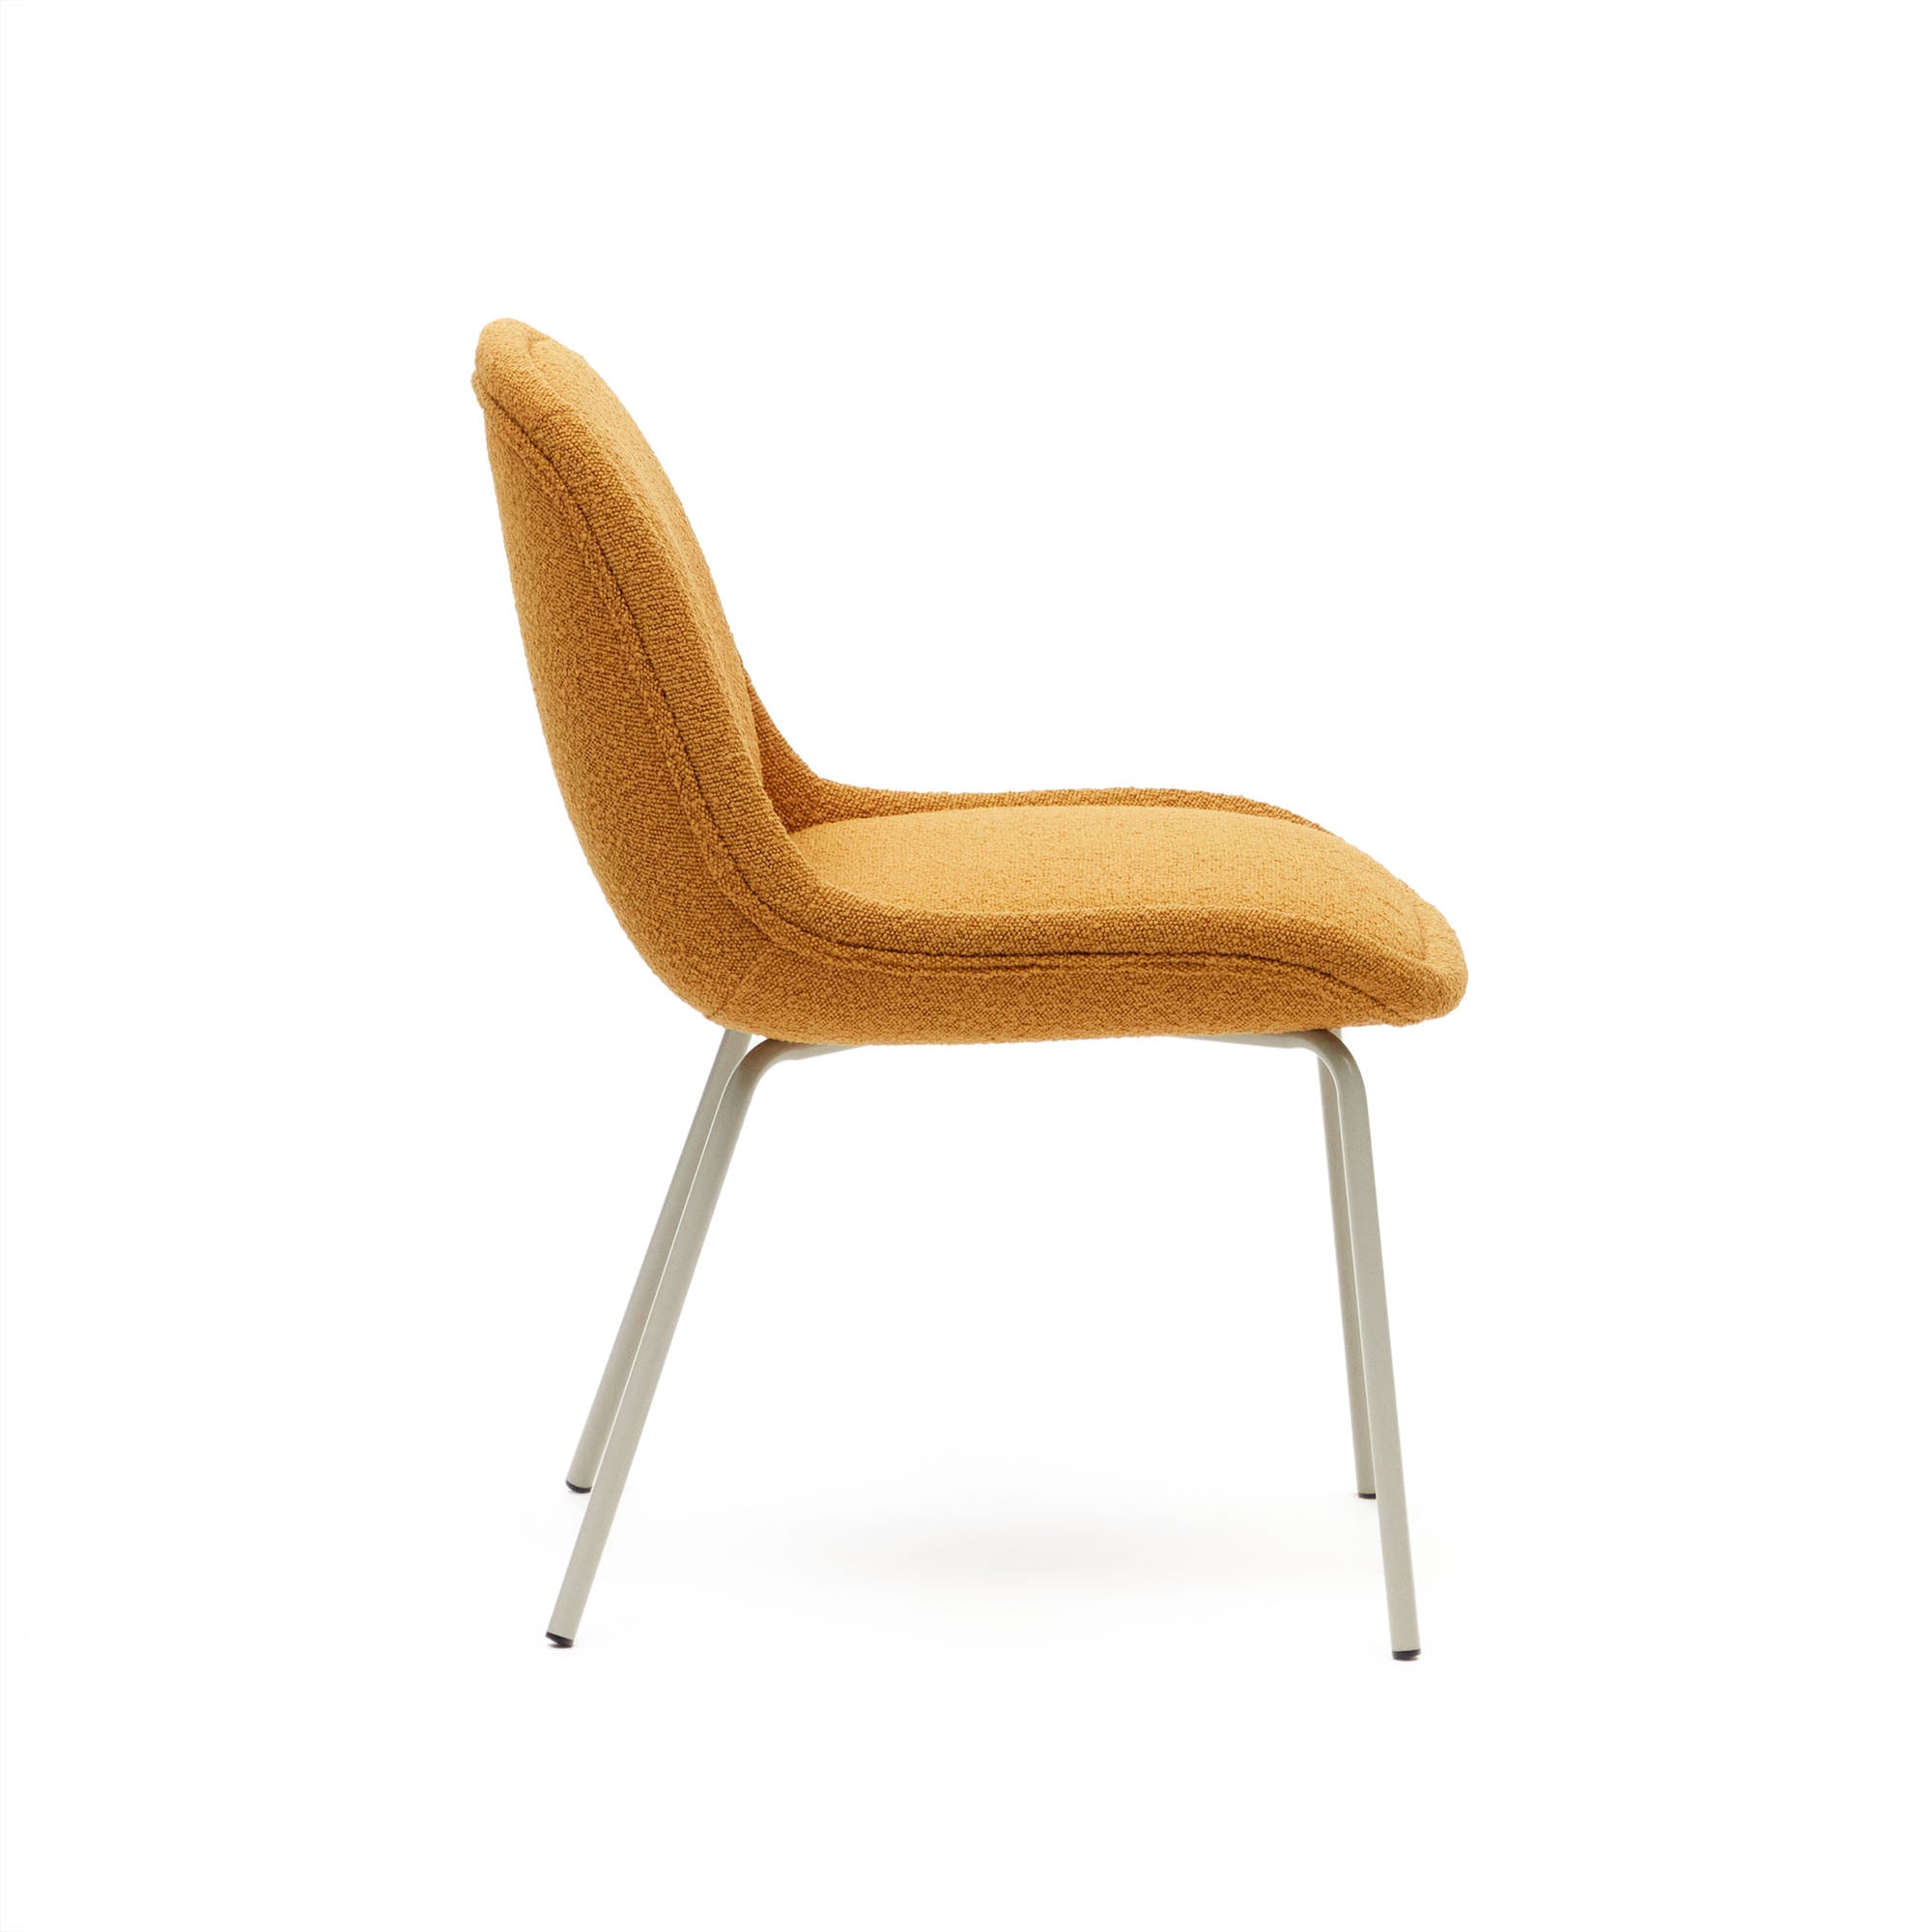 Aimin chair in mustard fleece and steel legs with a matte beige painted finish